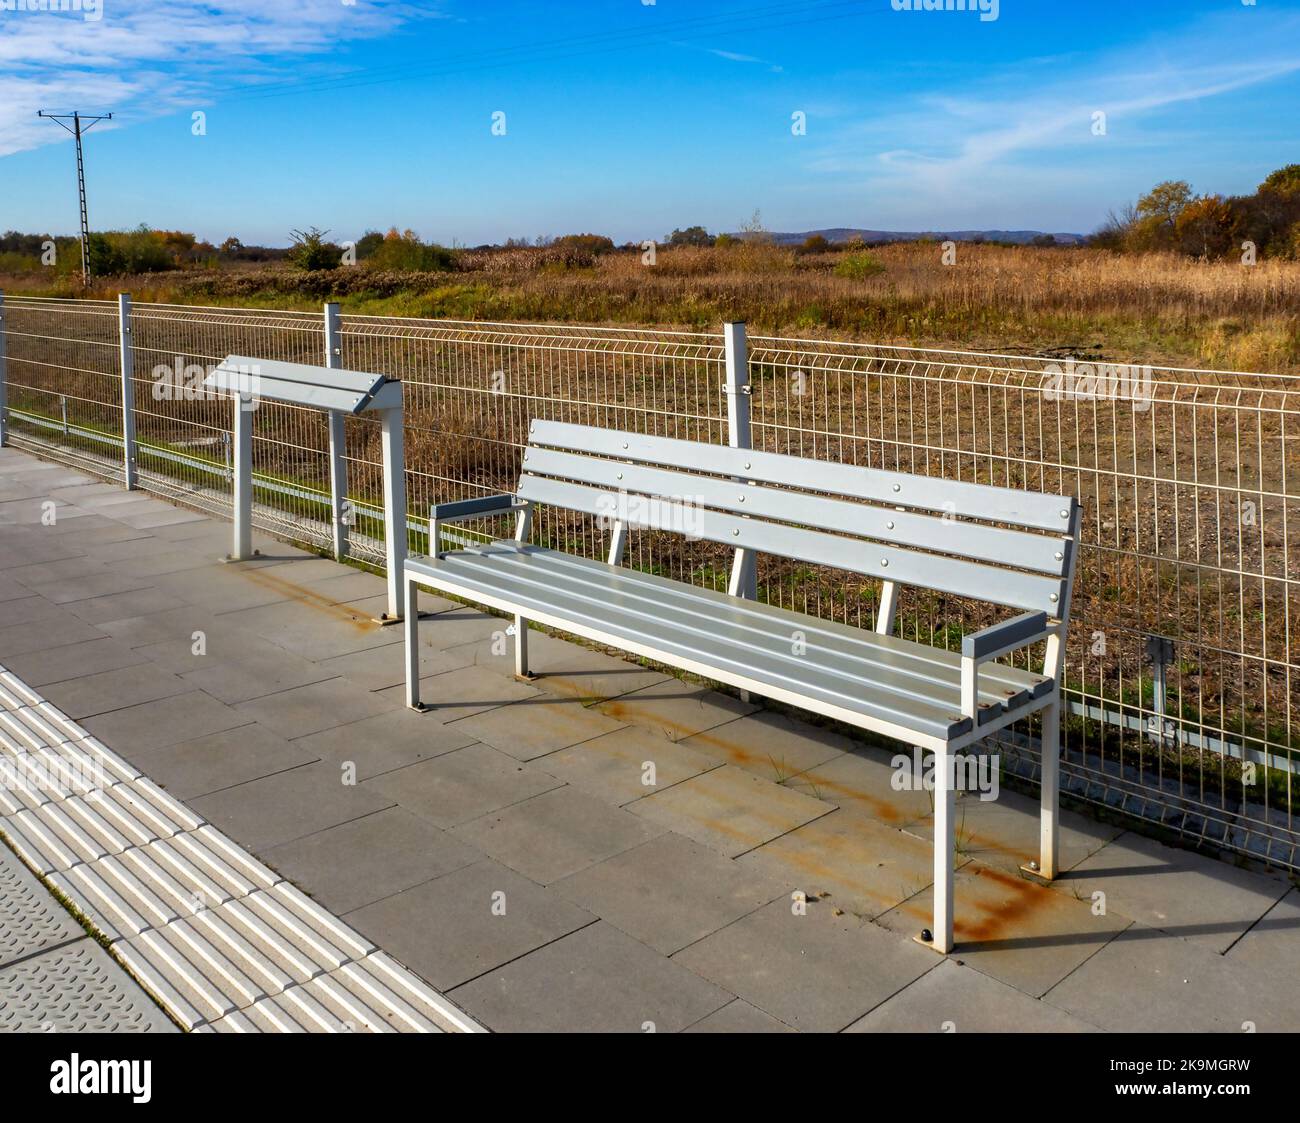 Traditional and leaning bench or lean bar (no established name yet) on the platform of a railway station. Leaning stand dries much faster after the ra Stock Photo